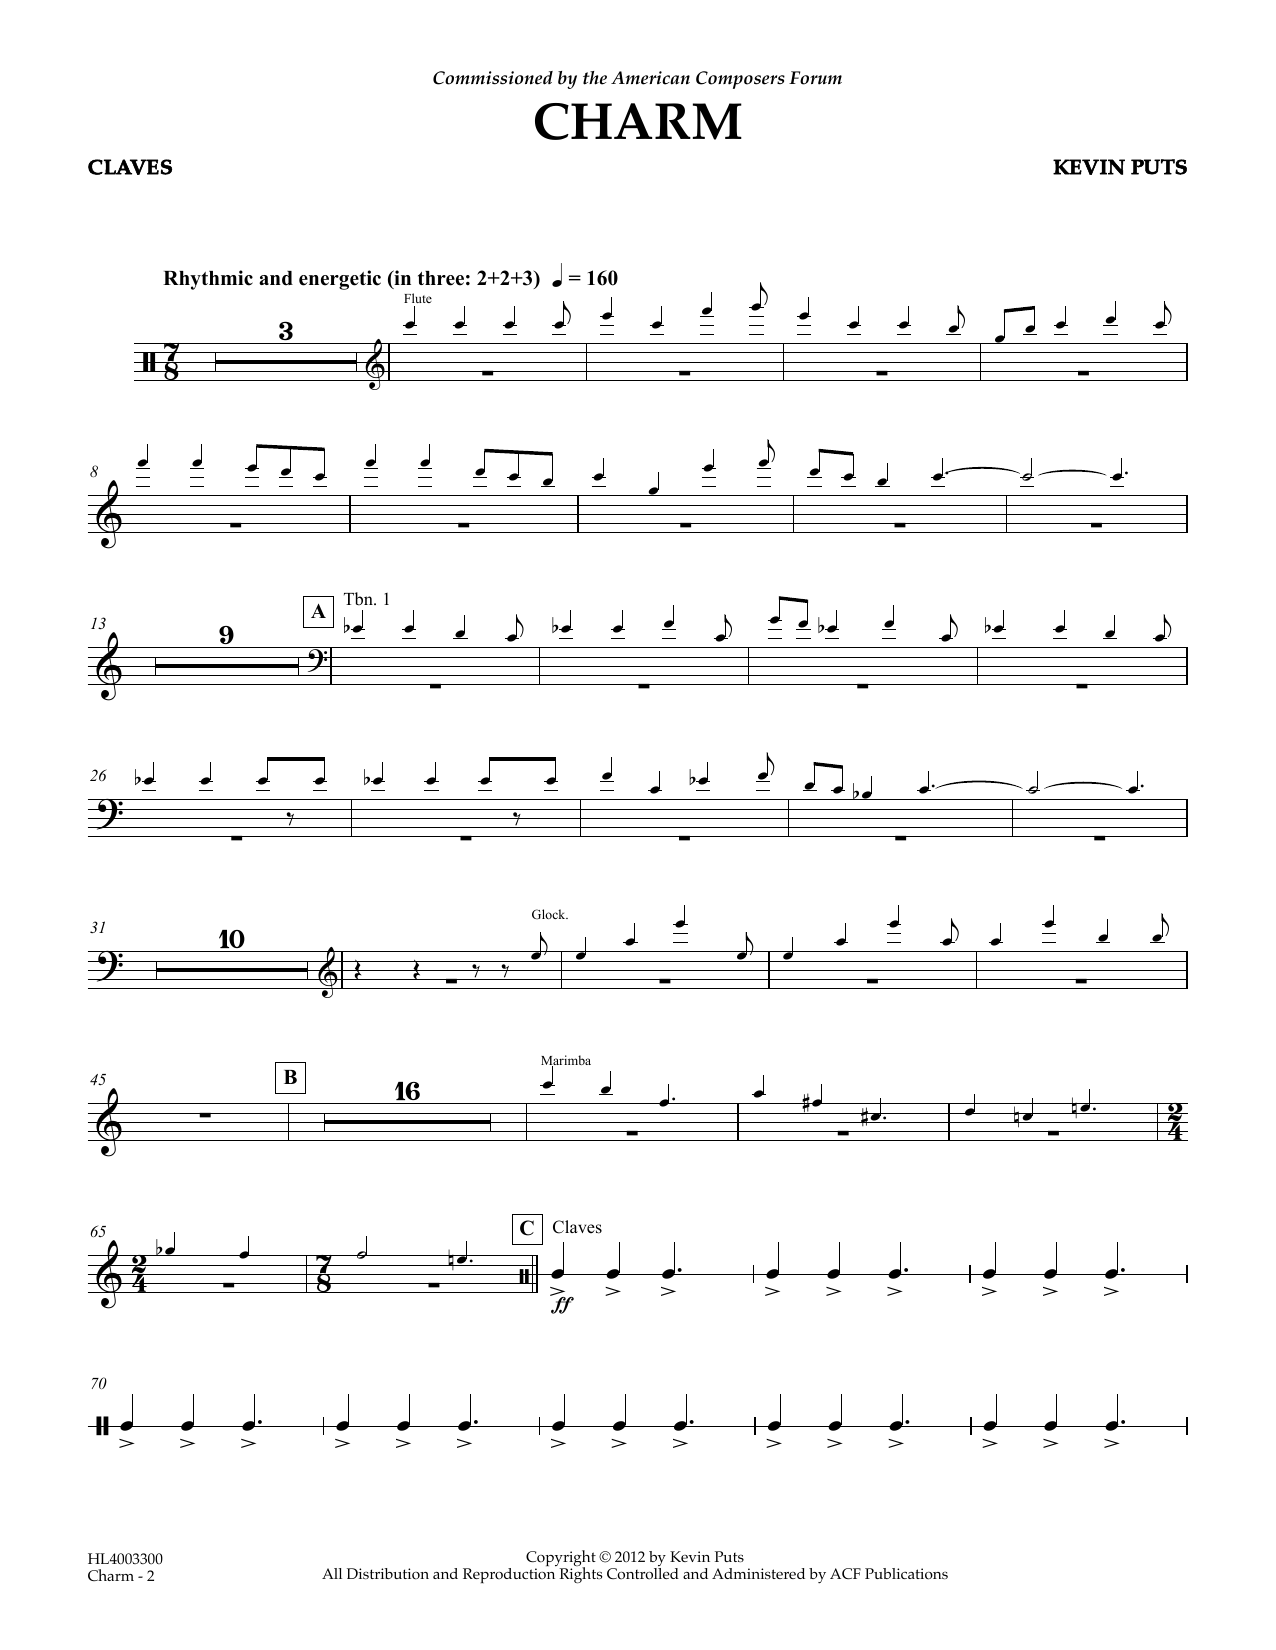 Download Kevin Puts Charm - Claves Sheet Music